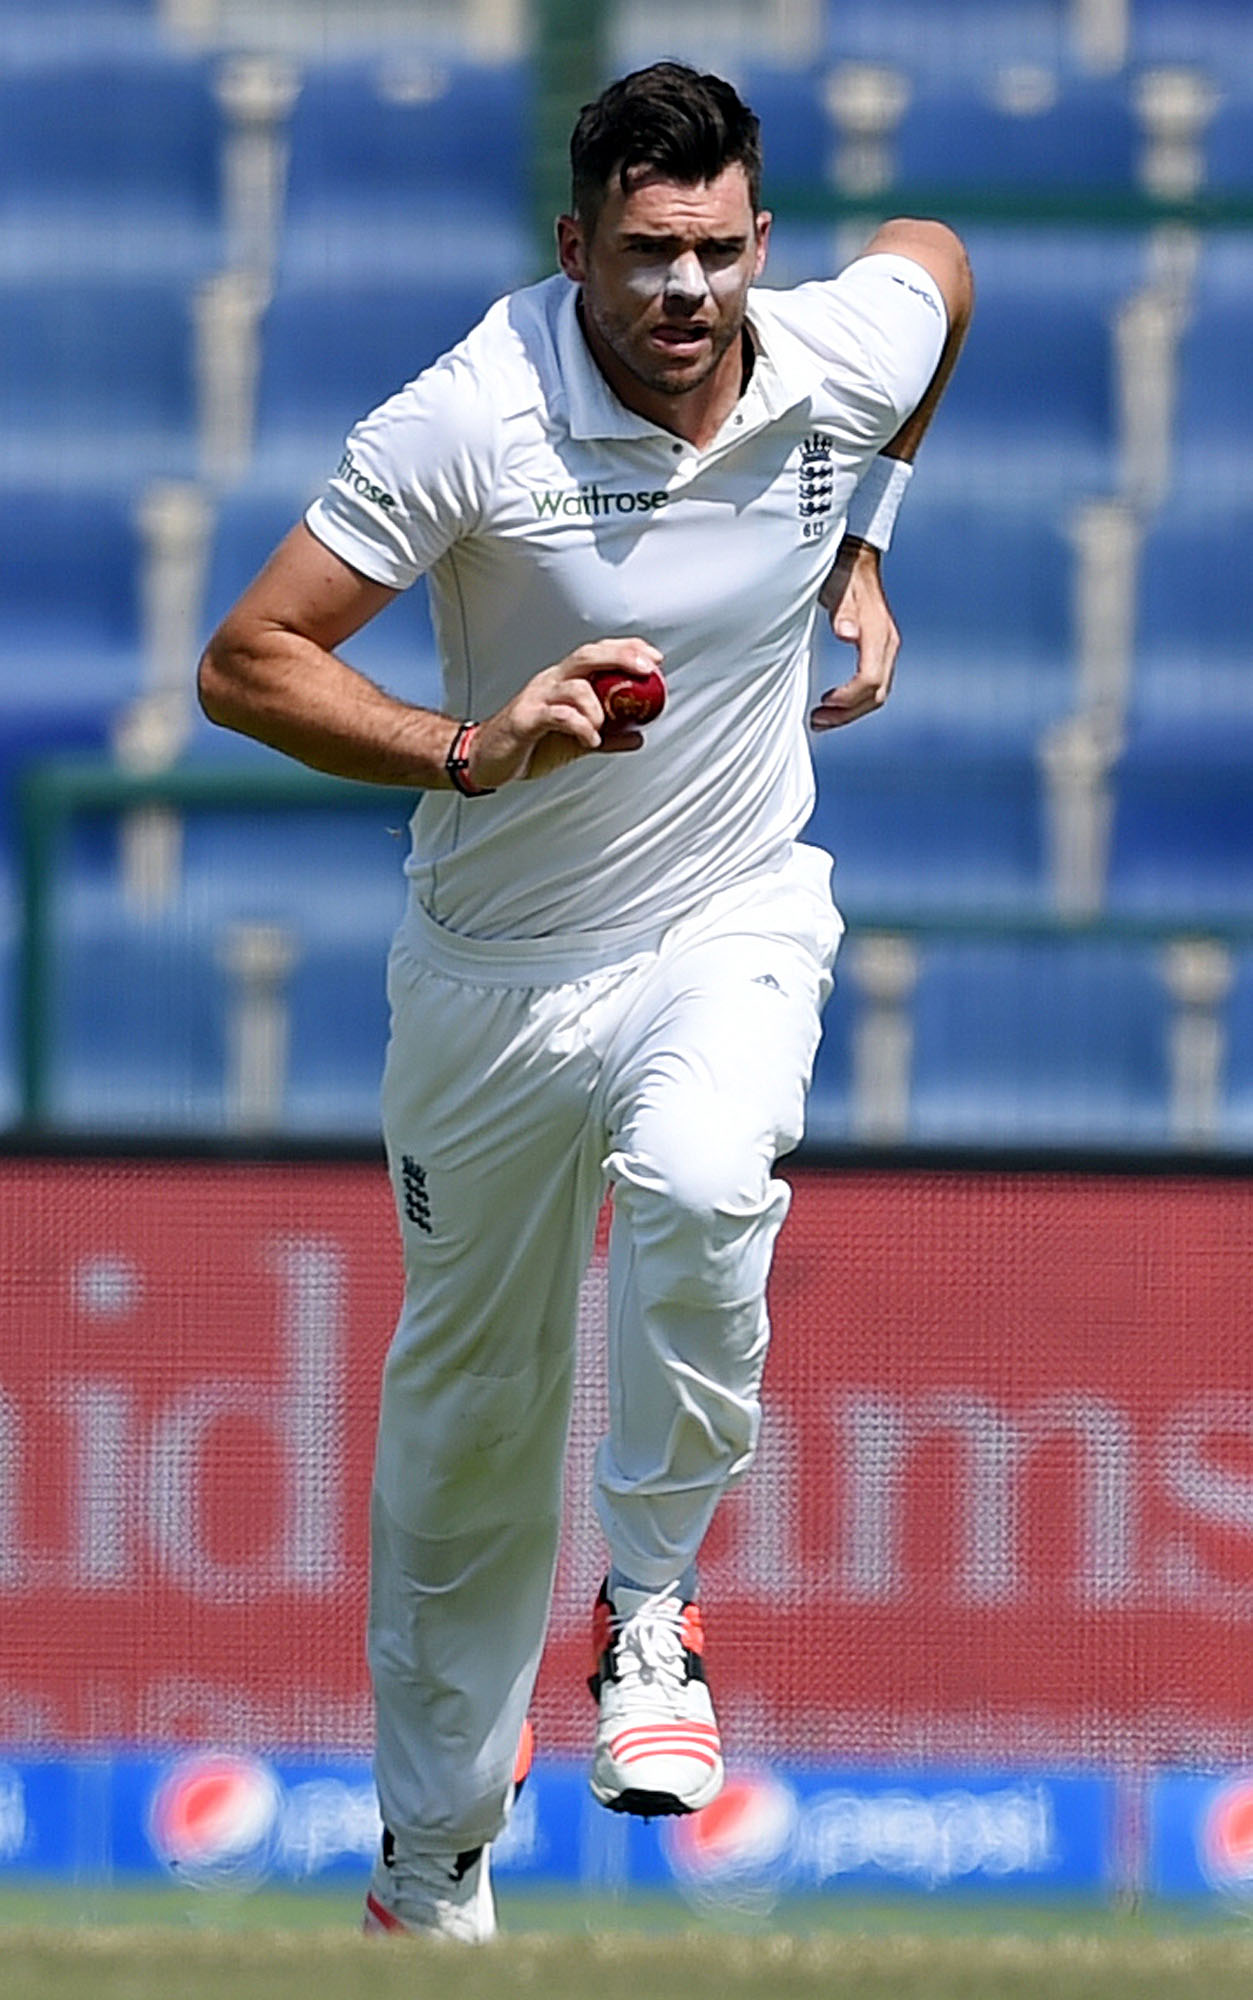 James Anderson in action during the final day of the first test match between Pakistan and England at Zayed Cricket Stadium in Abu Dhabi, United Arab Emirates, Saturday, Oct.17, 2015. (AP Photo/Hafsal Ahmed)